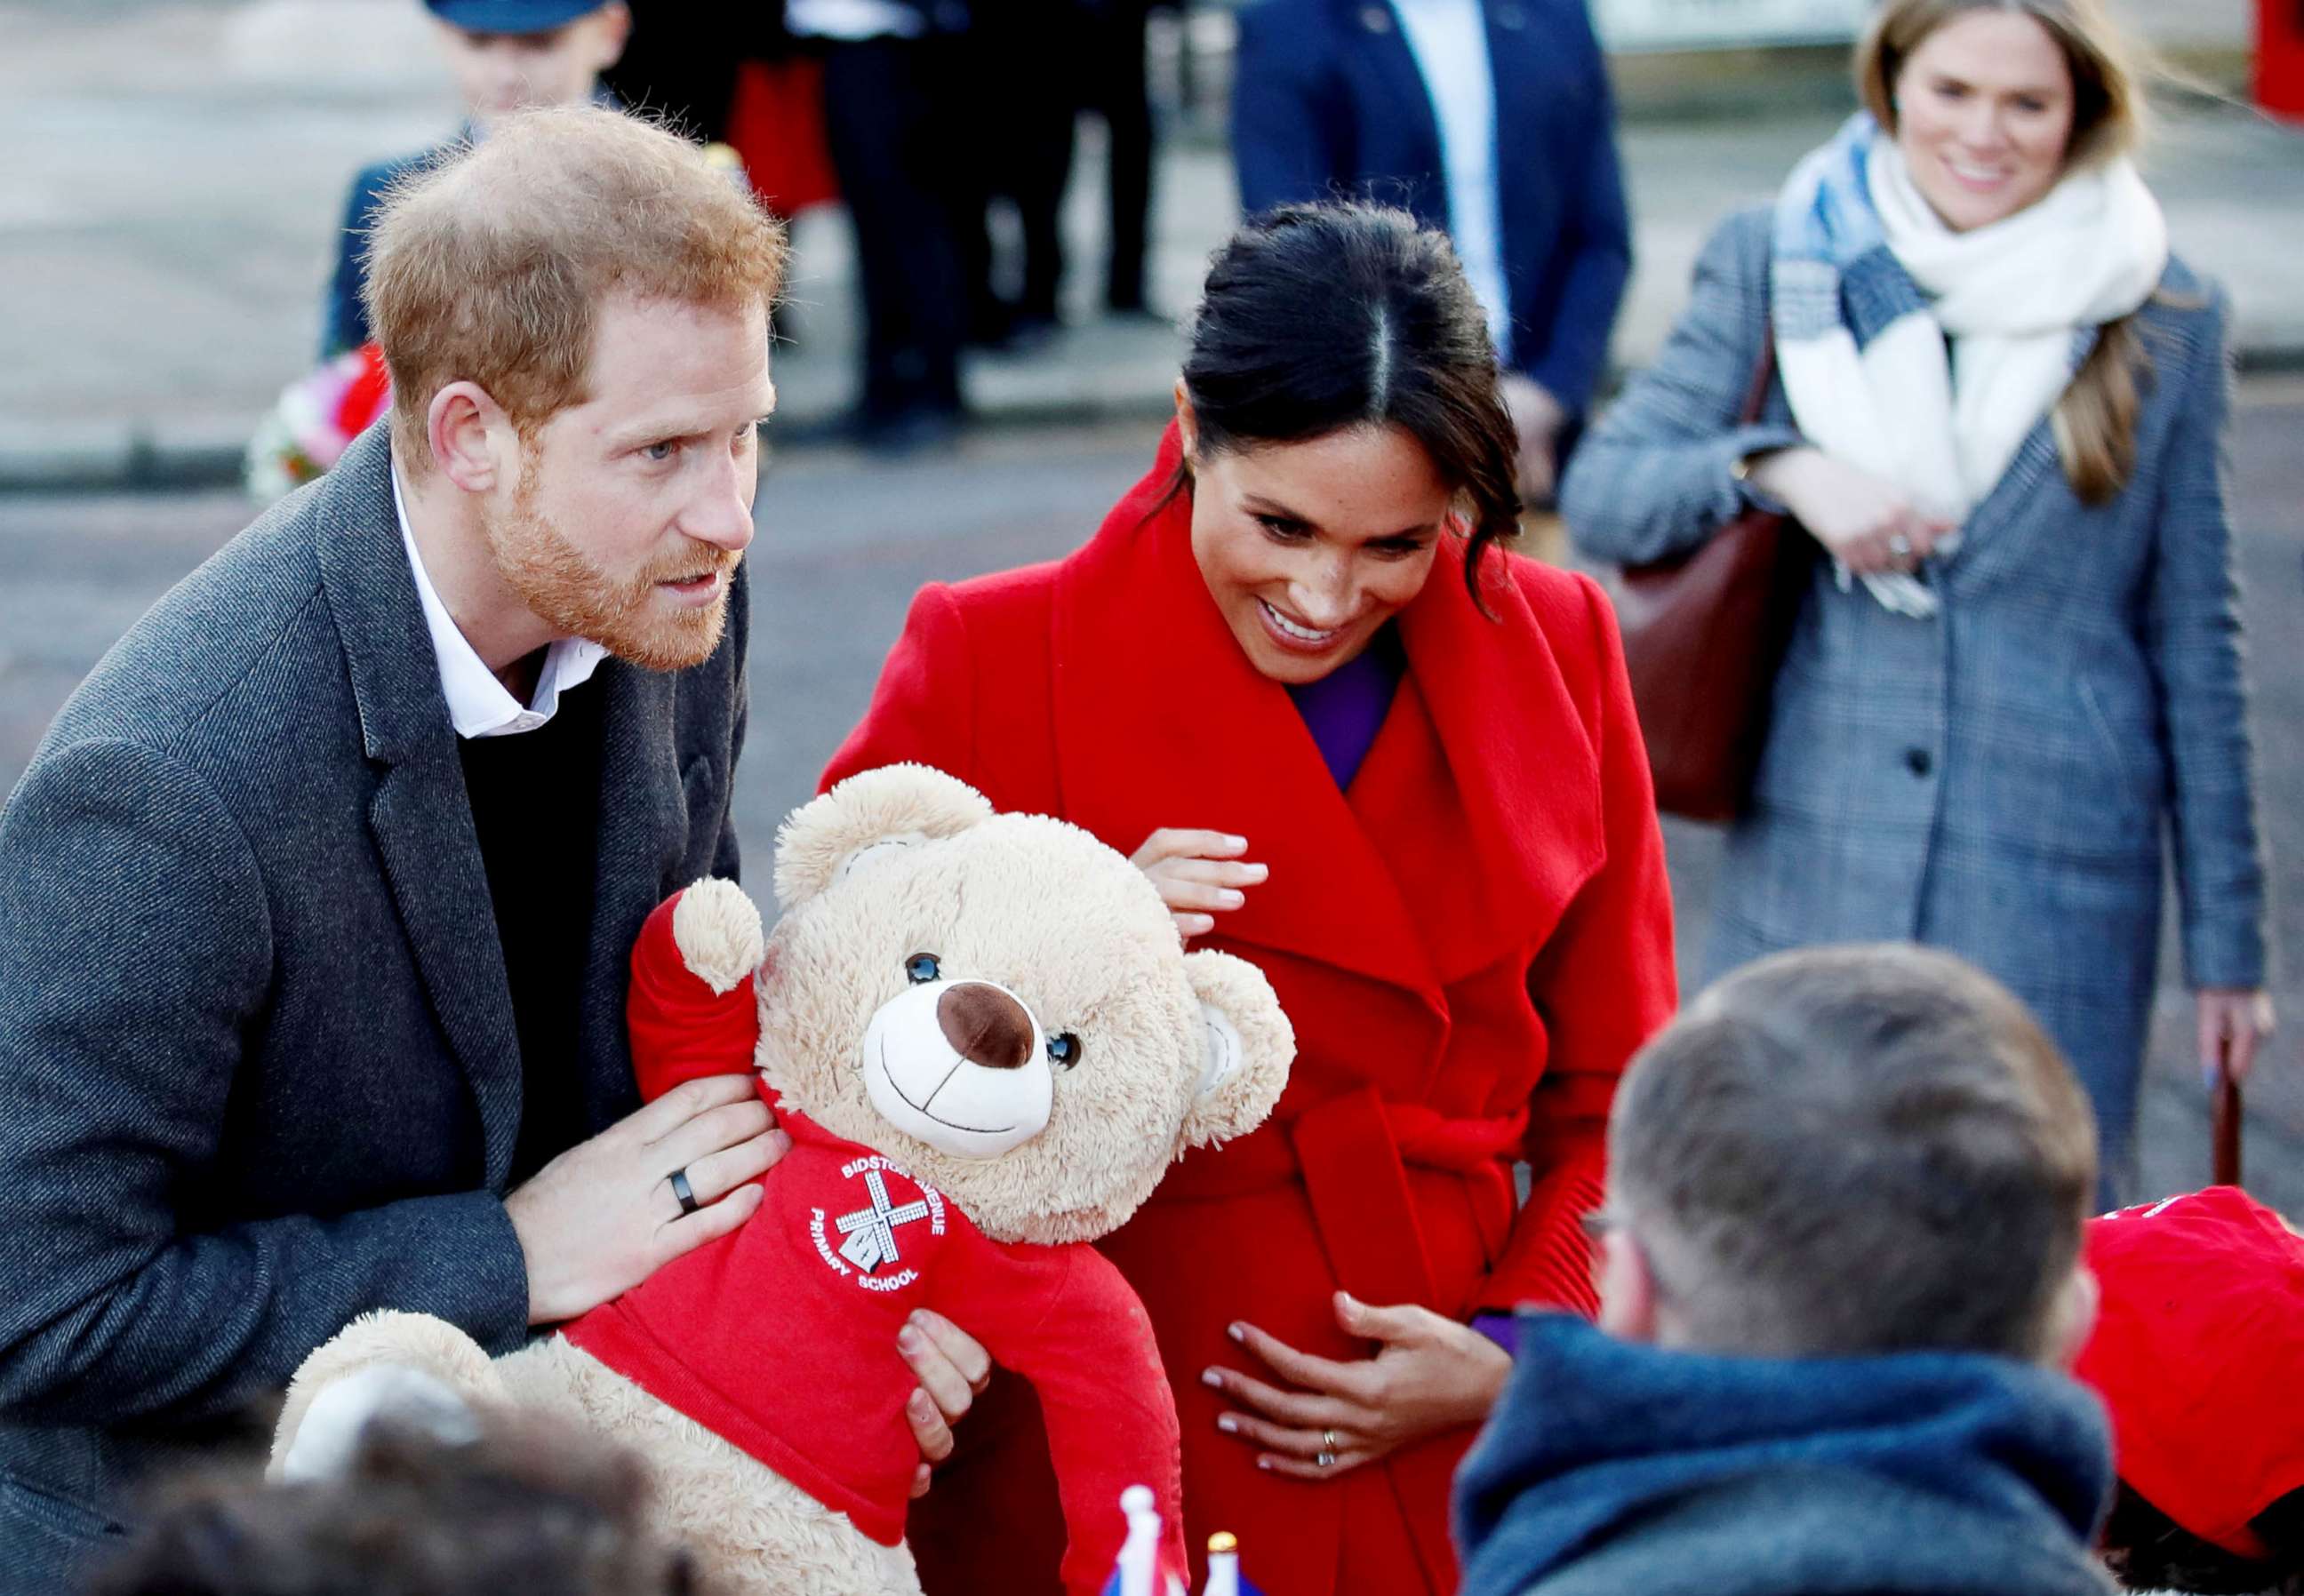 PHOTO: Britain's Prince Harry and Meghan Markle, Duchess of Sussex receive a teddy bear as they visit the Hamilton Square in Birkenhead, Britain, Jan. 14, 2019.